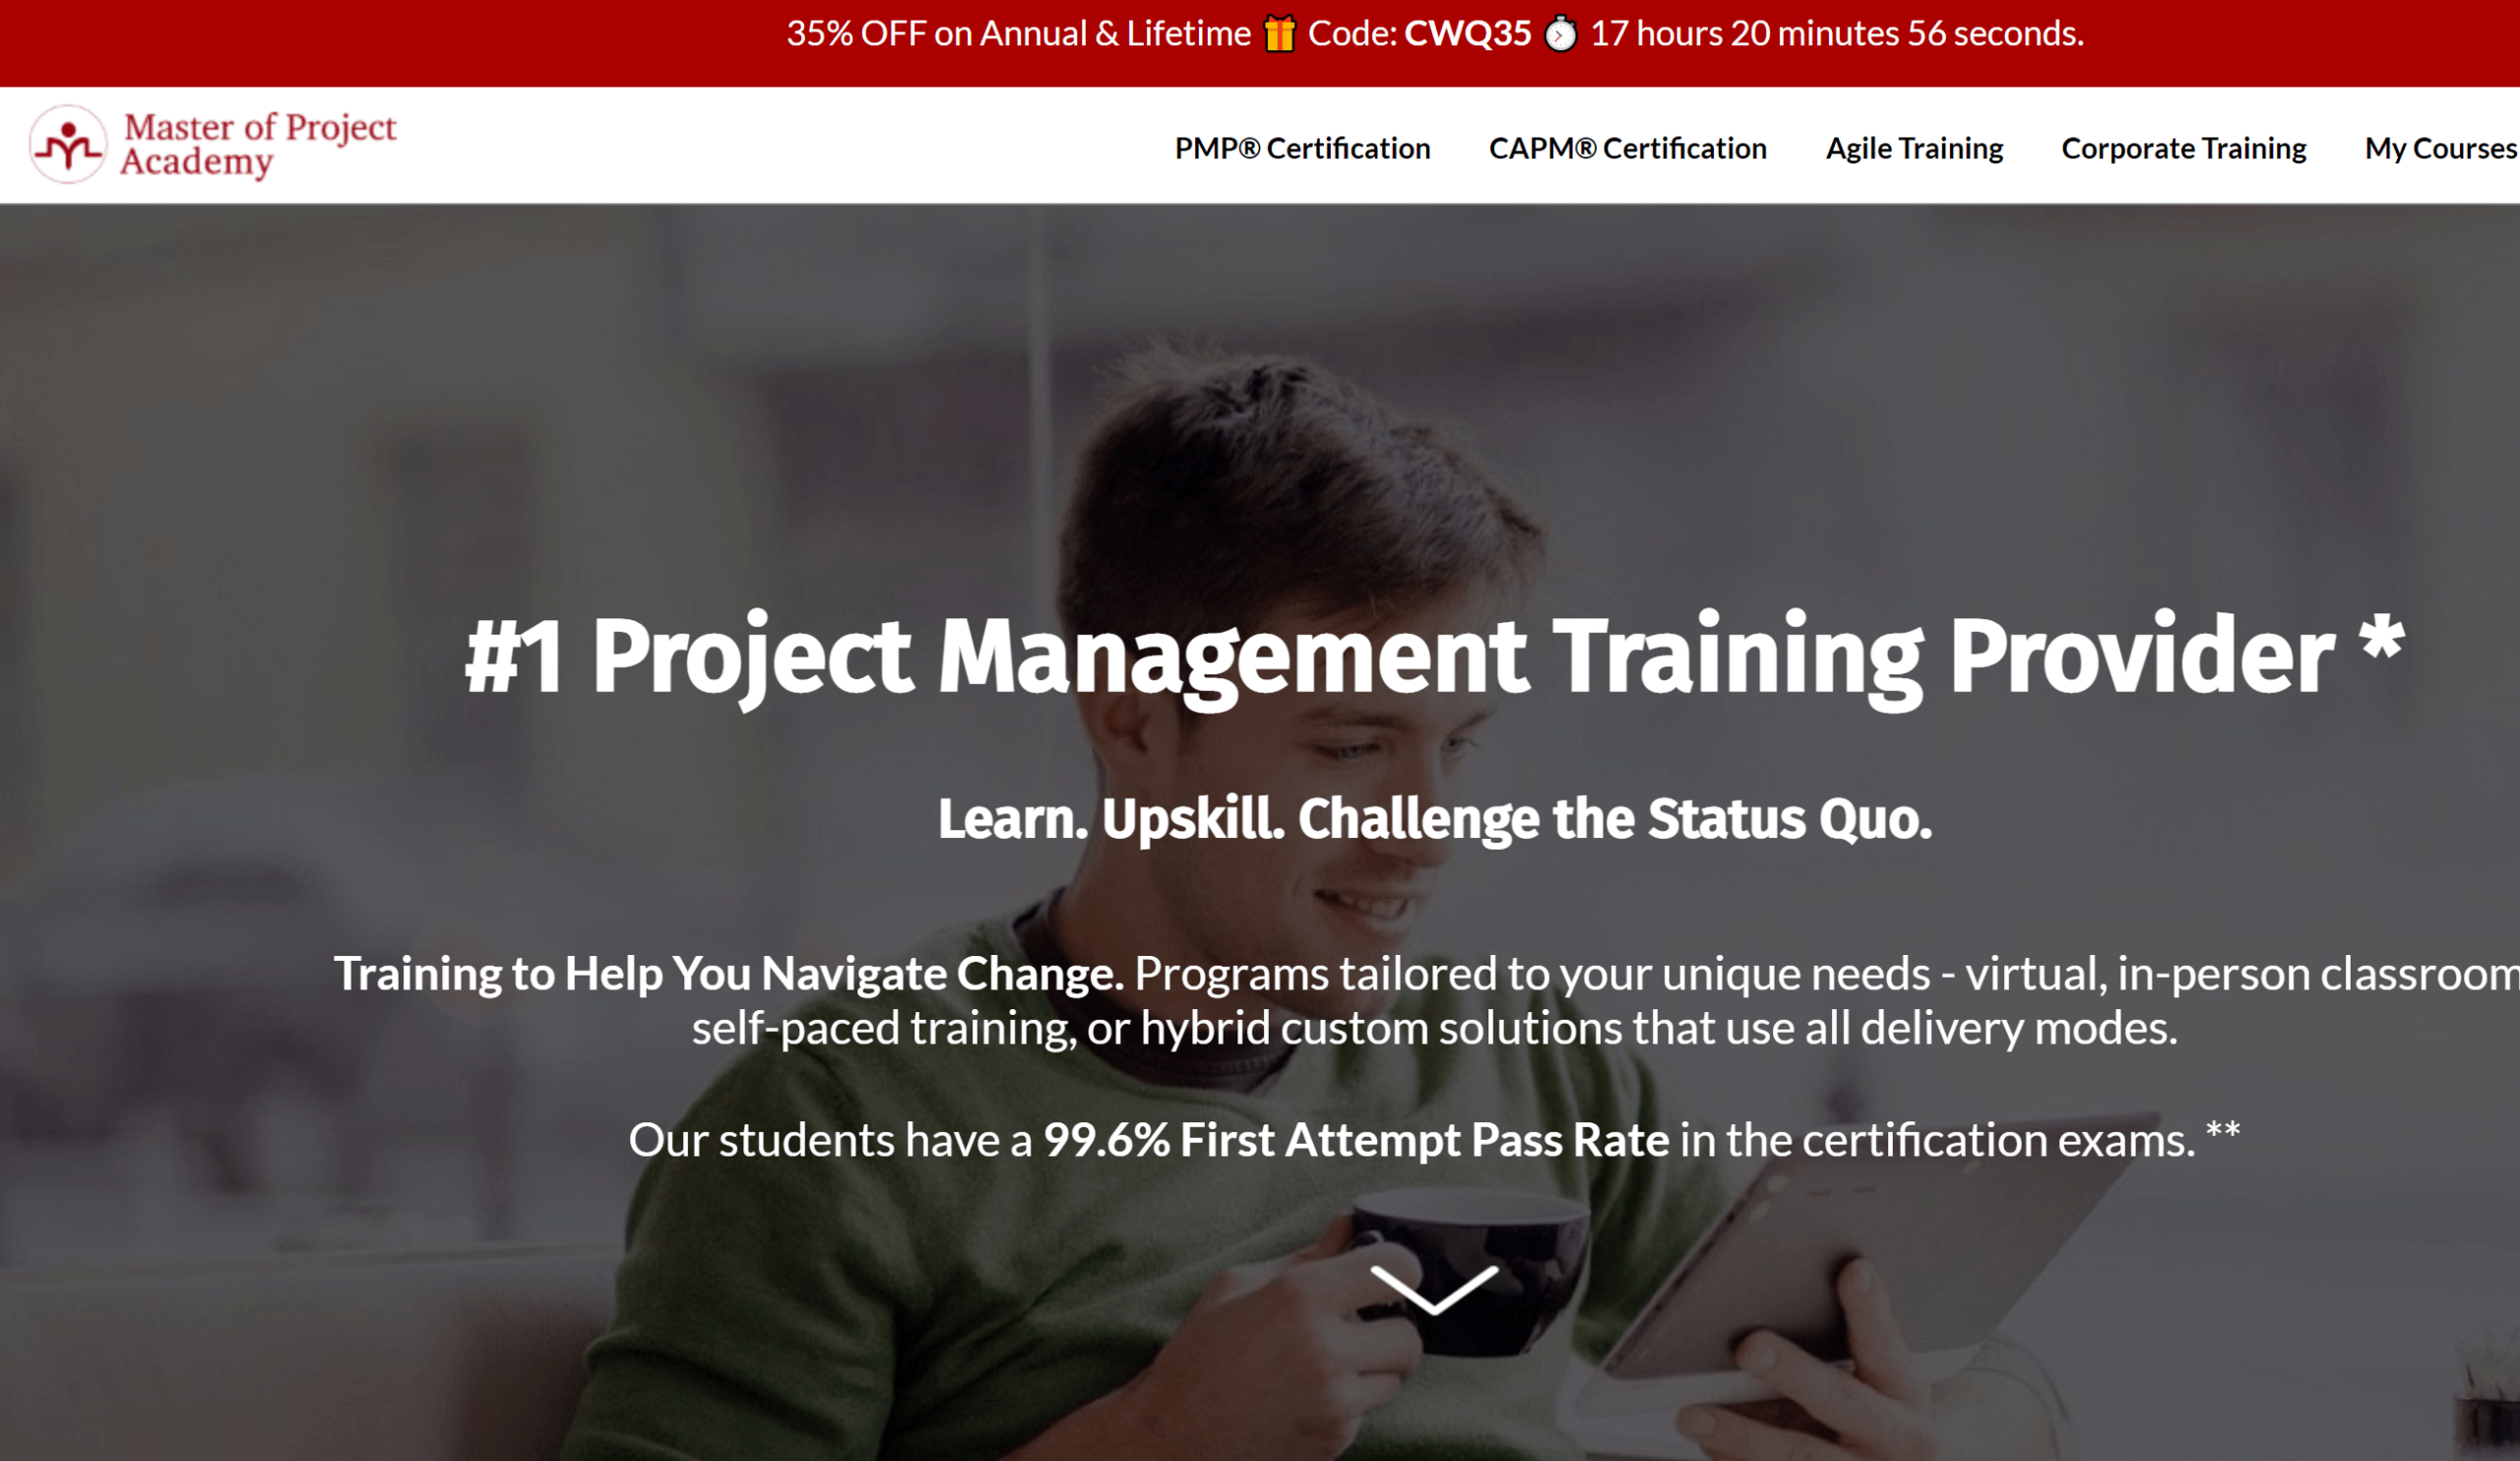 Master of project academy